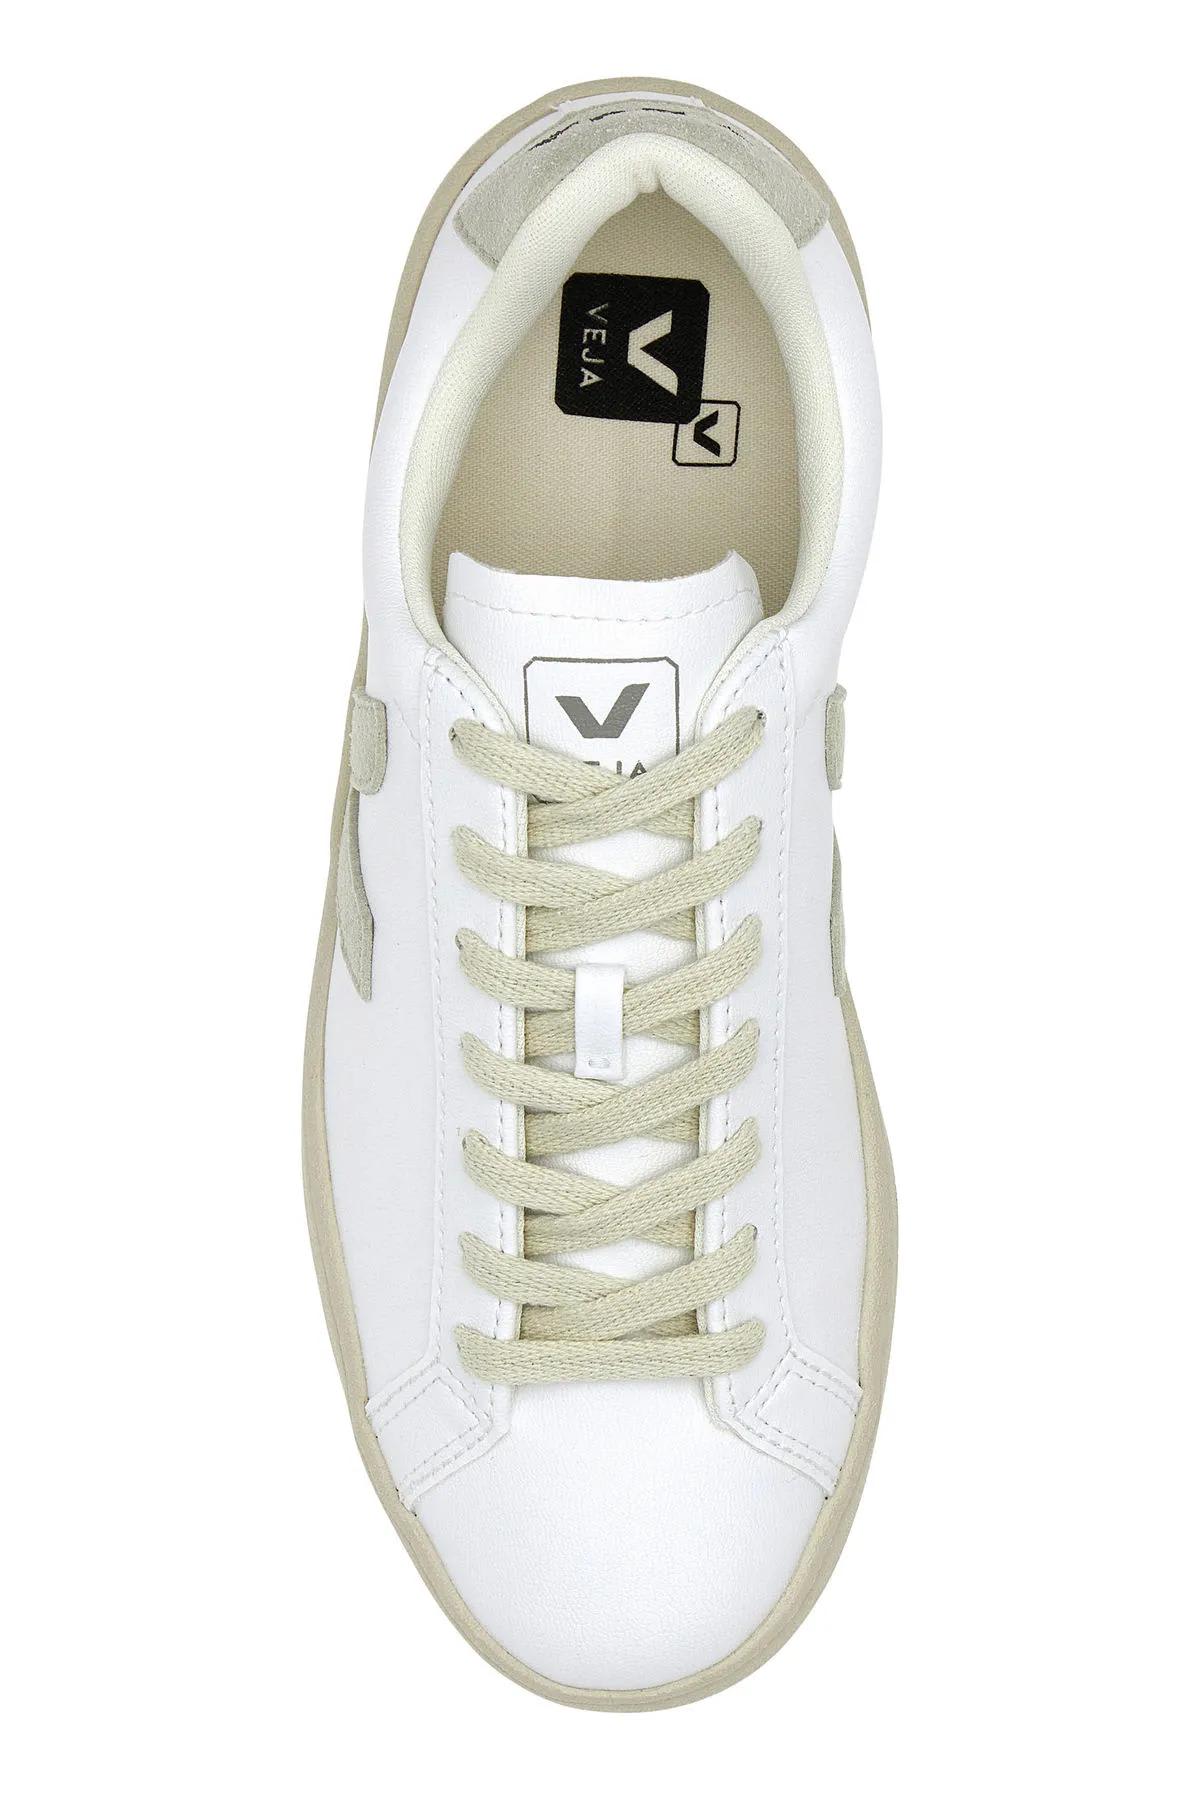 Shop Veja White Synthetic Leather Urca Sneakers In White_natural